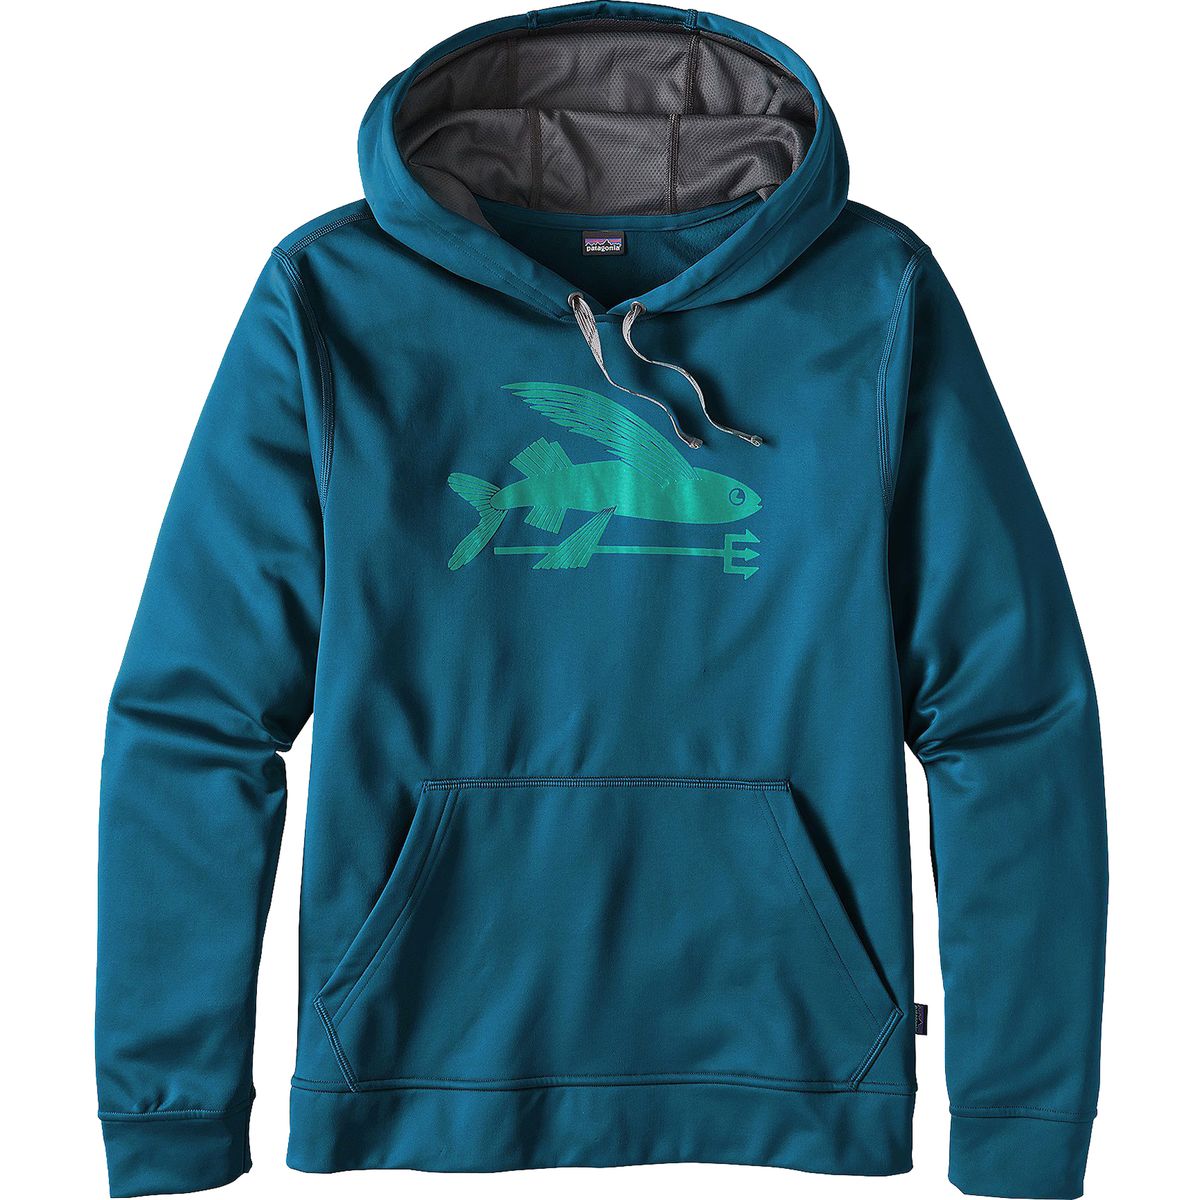 Patagonia Flying Fish PolyCycle Pullover Hoodie - Men's - Clothing